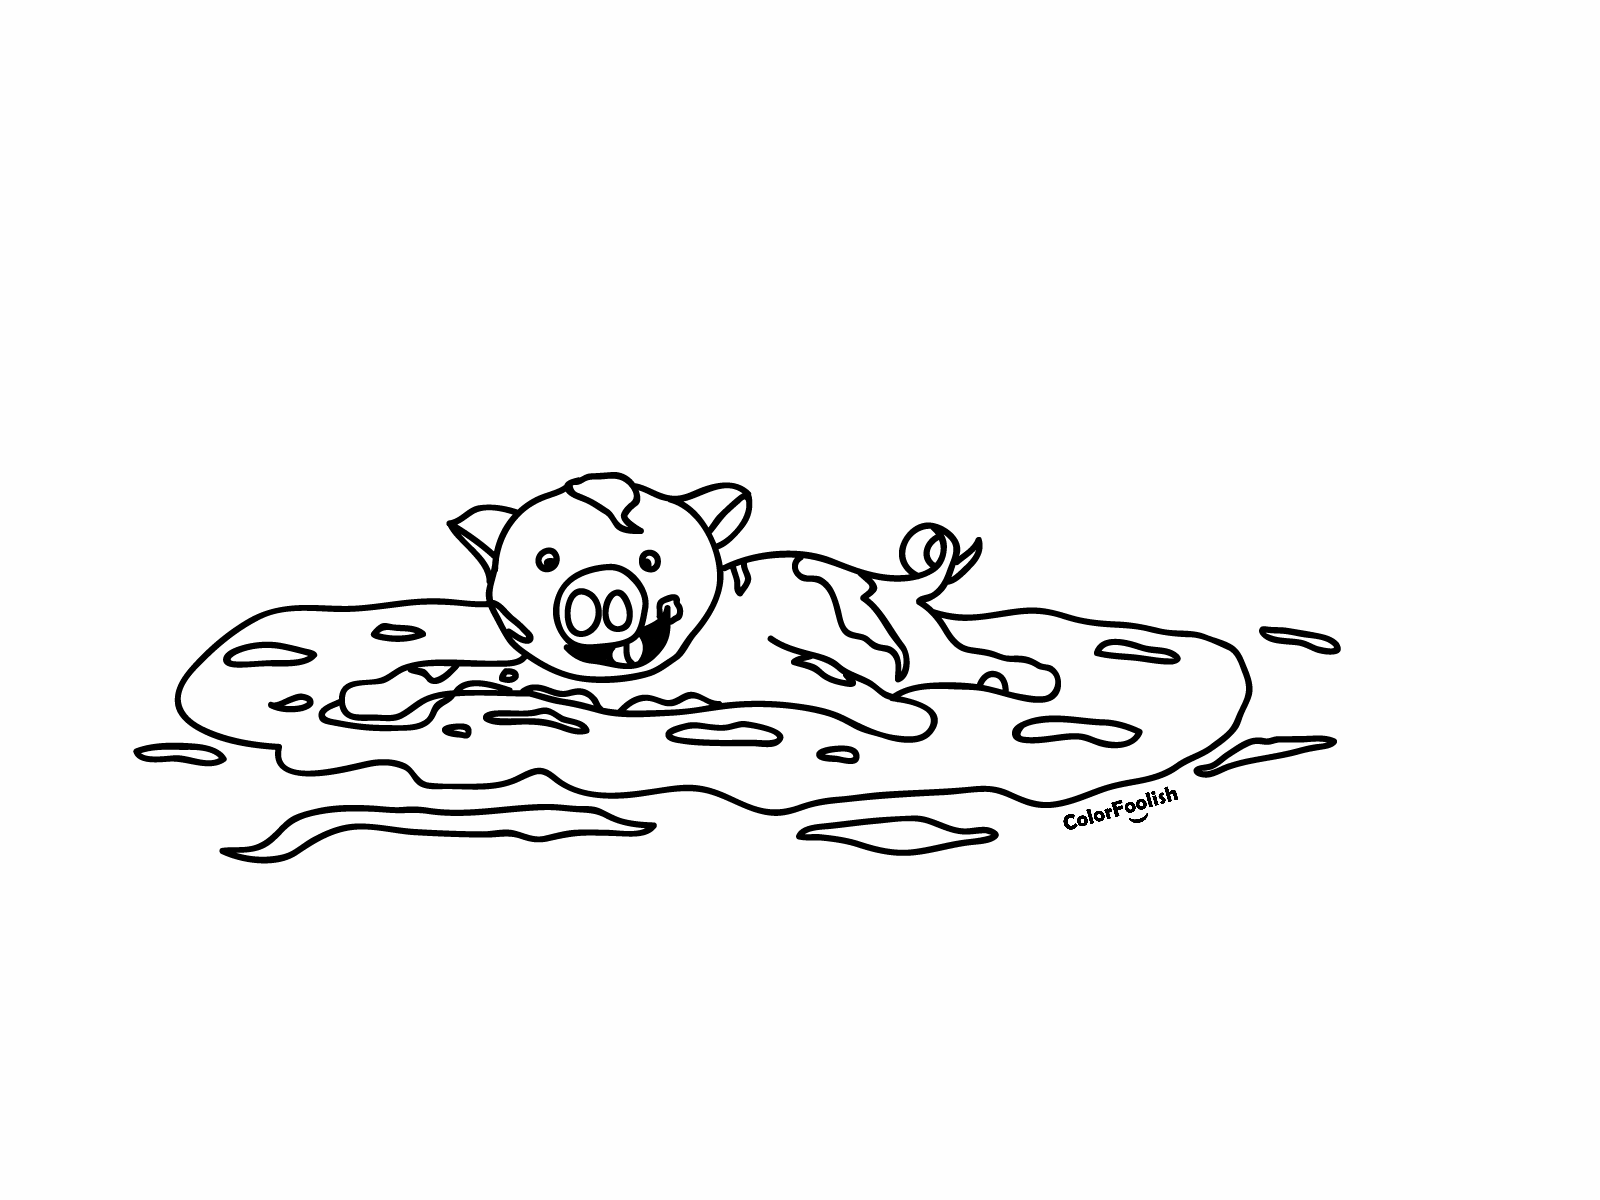 Coloring page of a pig in the mud